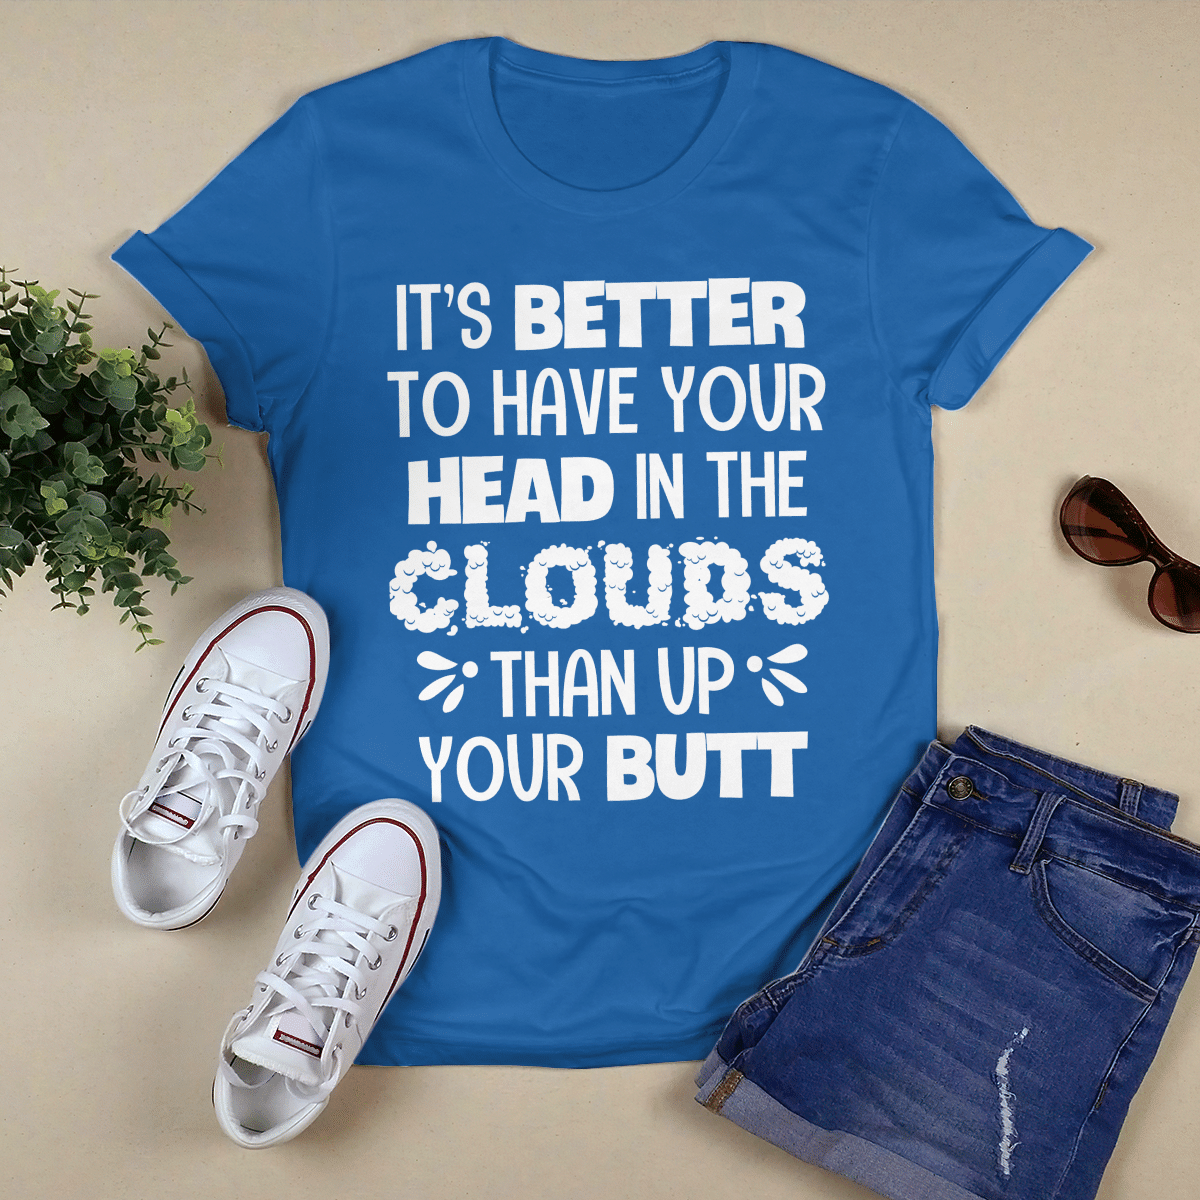 It_s Better To Have Your Head In The Clouds shirt